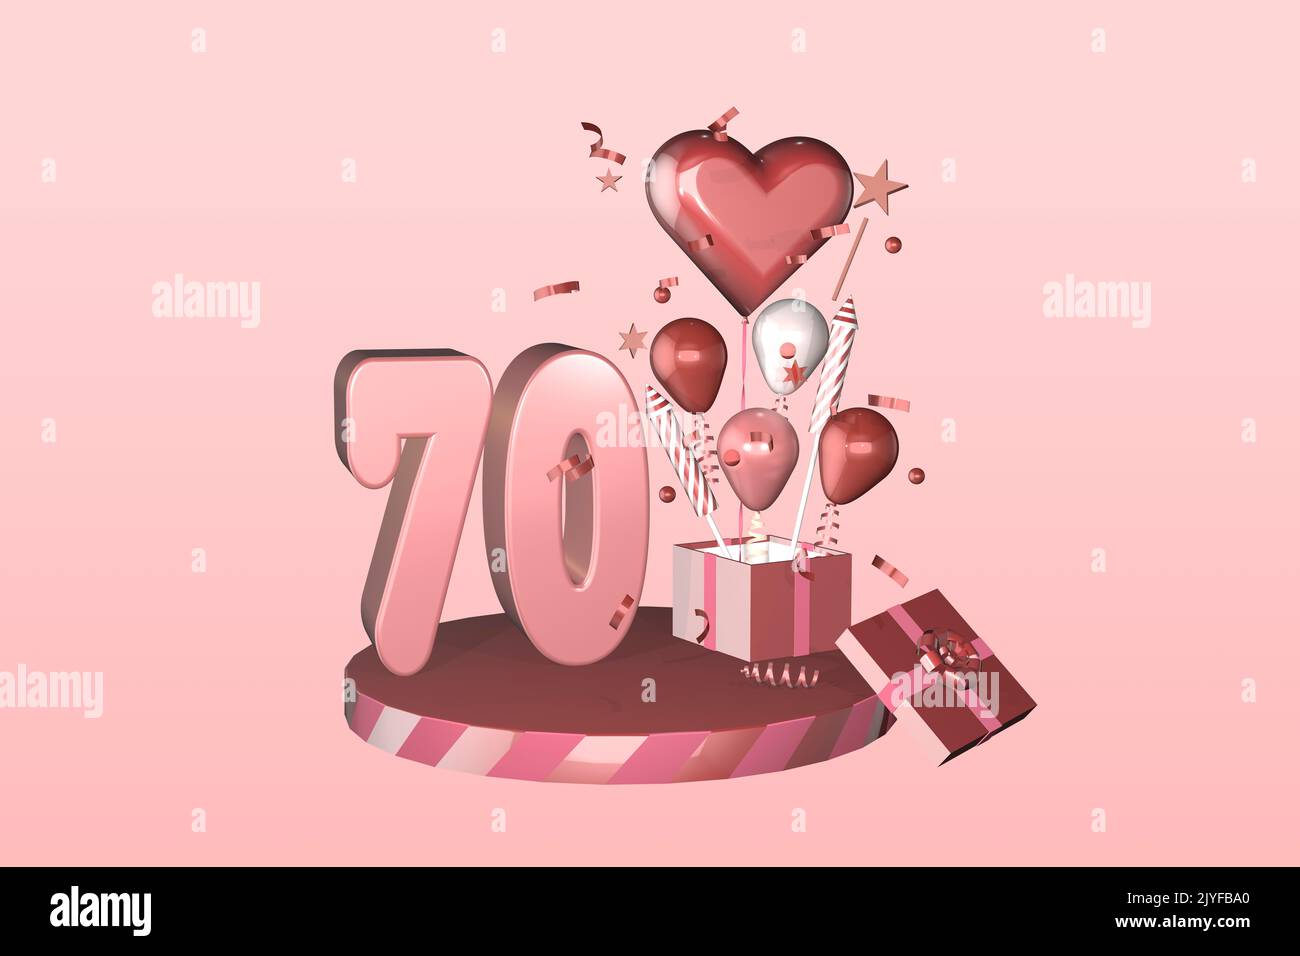 3D rendered display suitable for 70 70th birthday or seventy seventieth anniversary celebration card or invitation Stock Photo